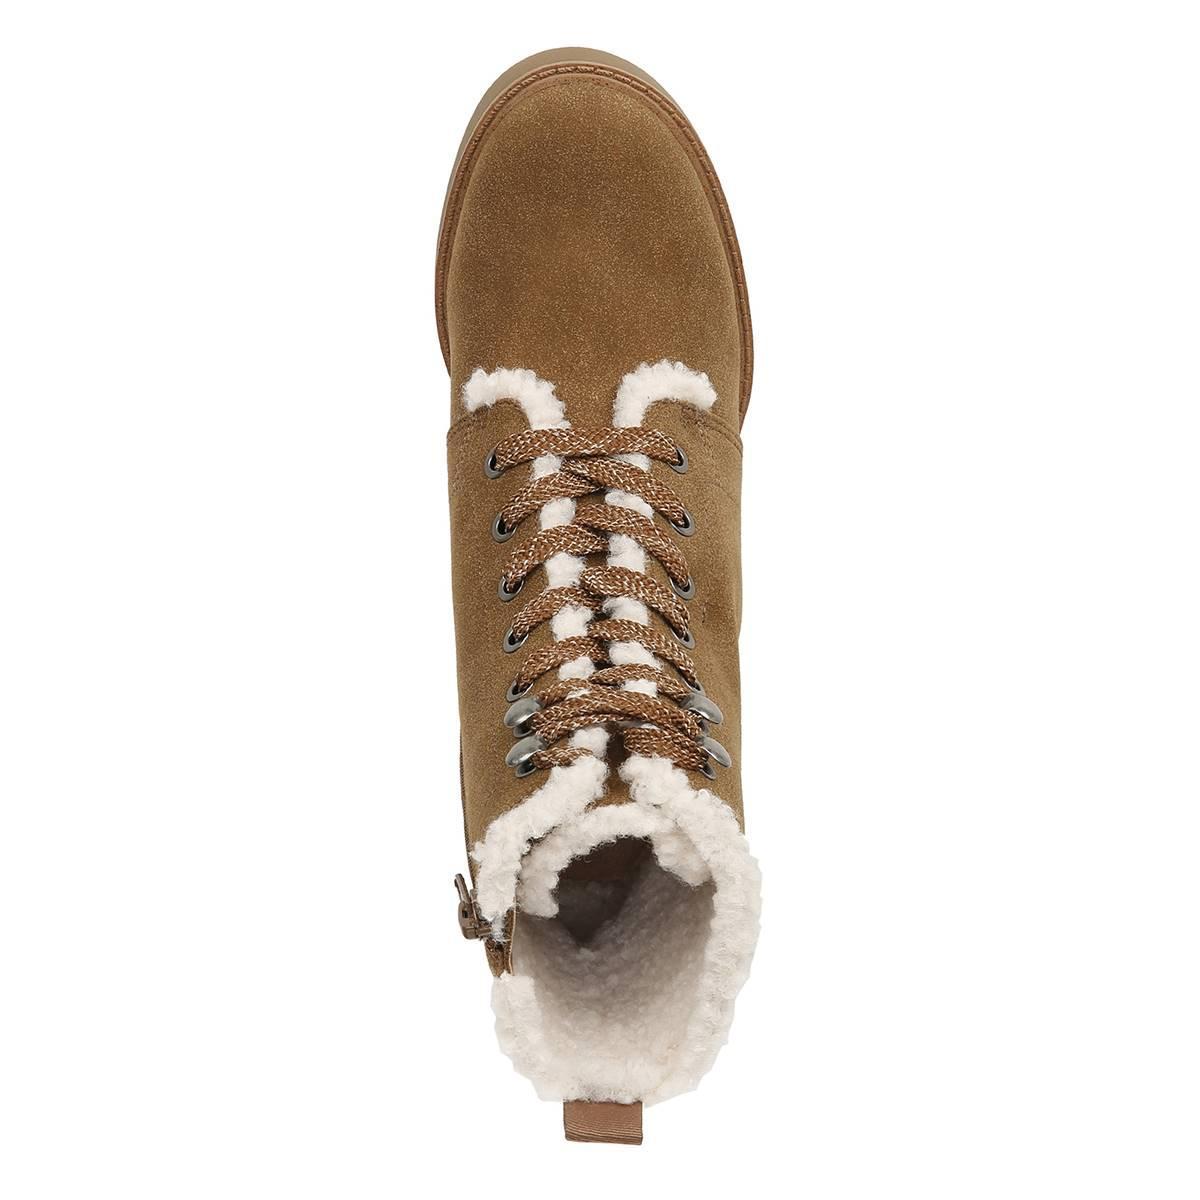 LifeStride Rhodes Faux Shearling Lined Bootie Product Image